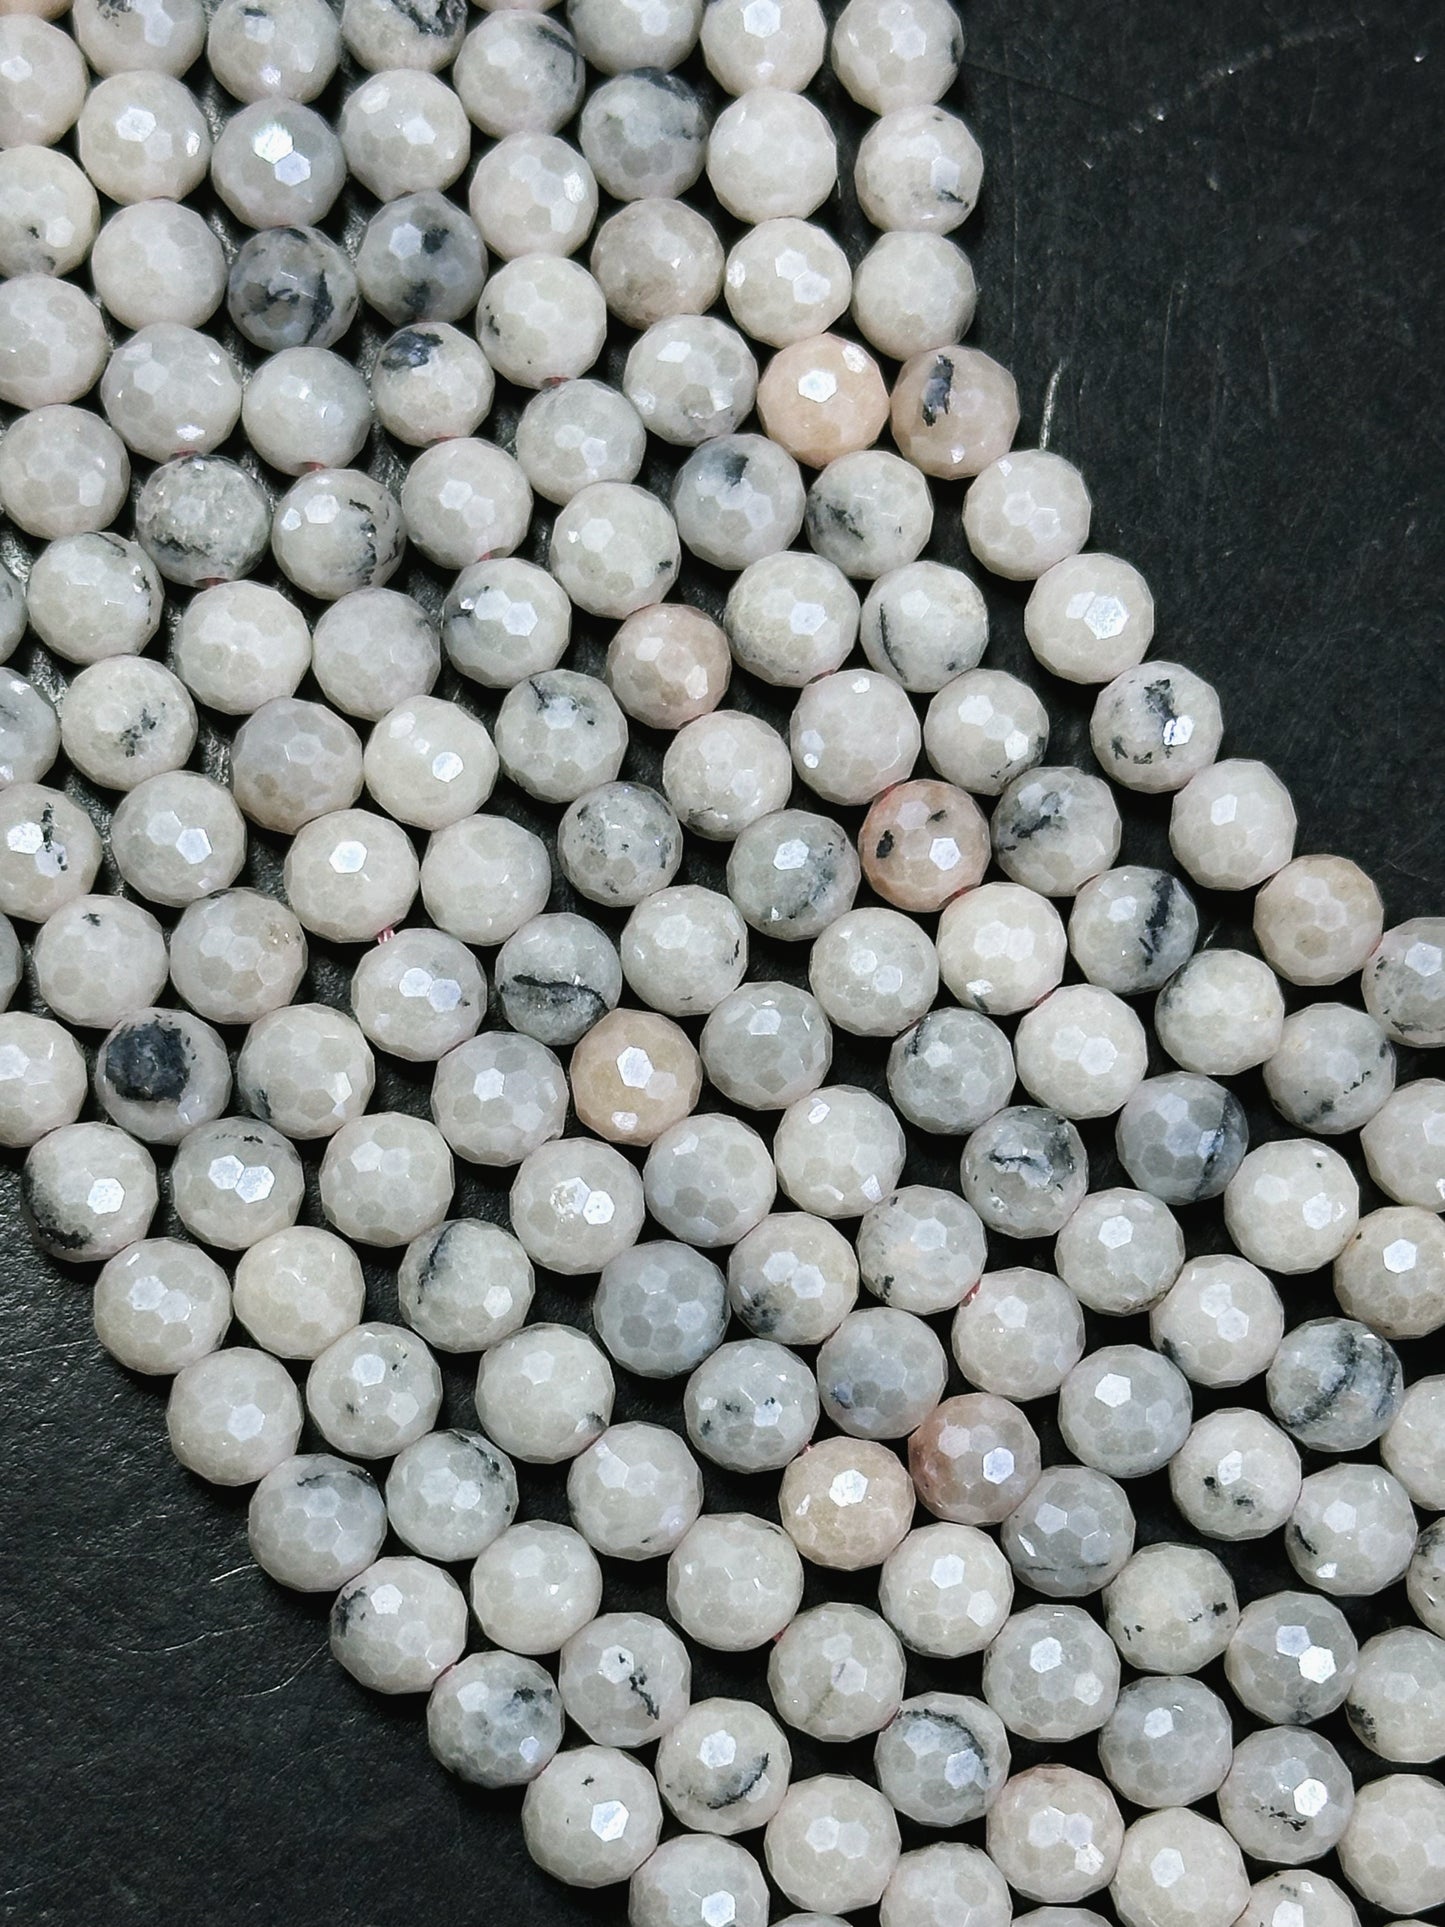 Mystic Natural Pink White Opal Gemstone Bead Faceted 6mm Round Bead, Beautiful Natural White Pink Color Mystic Opal Beads, Full Strand 15.5"